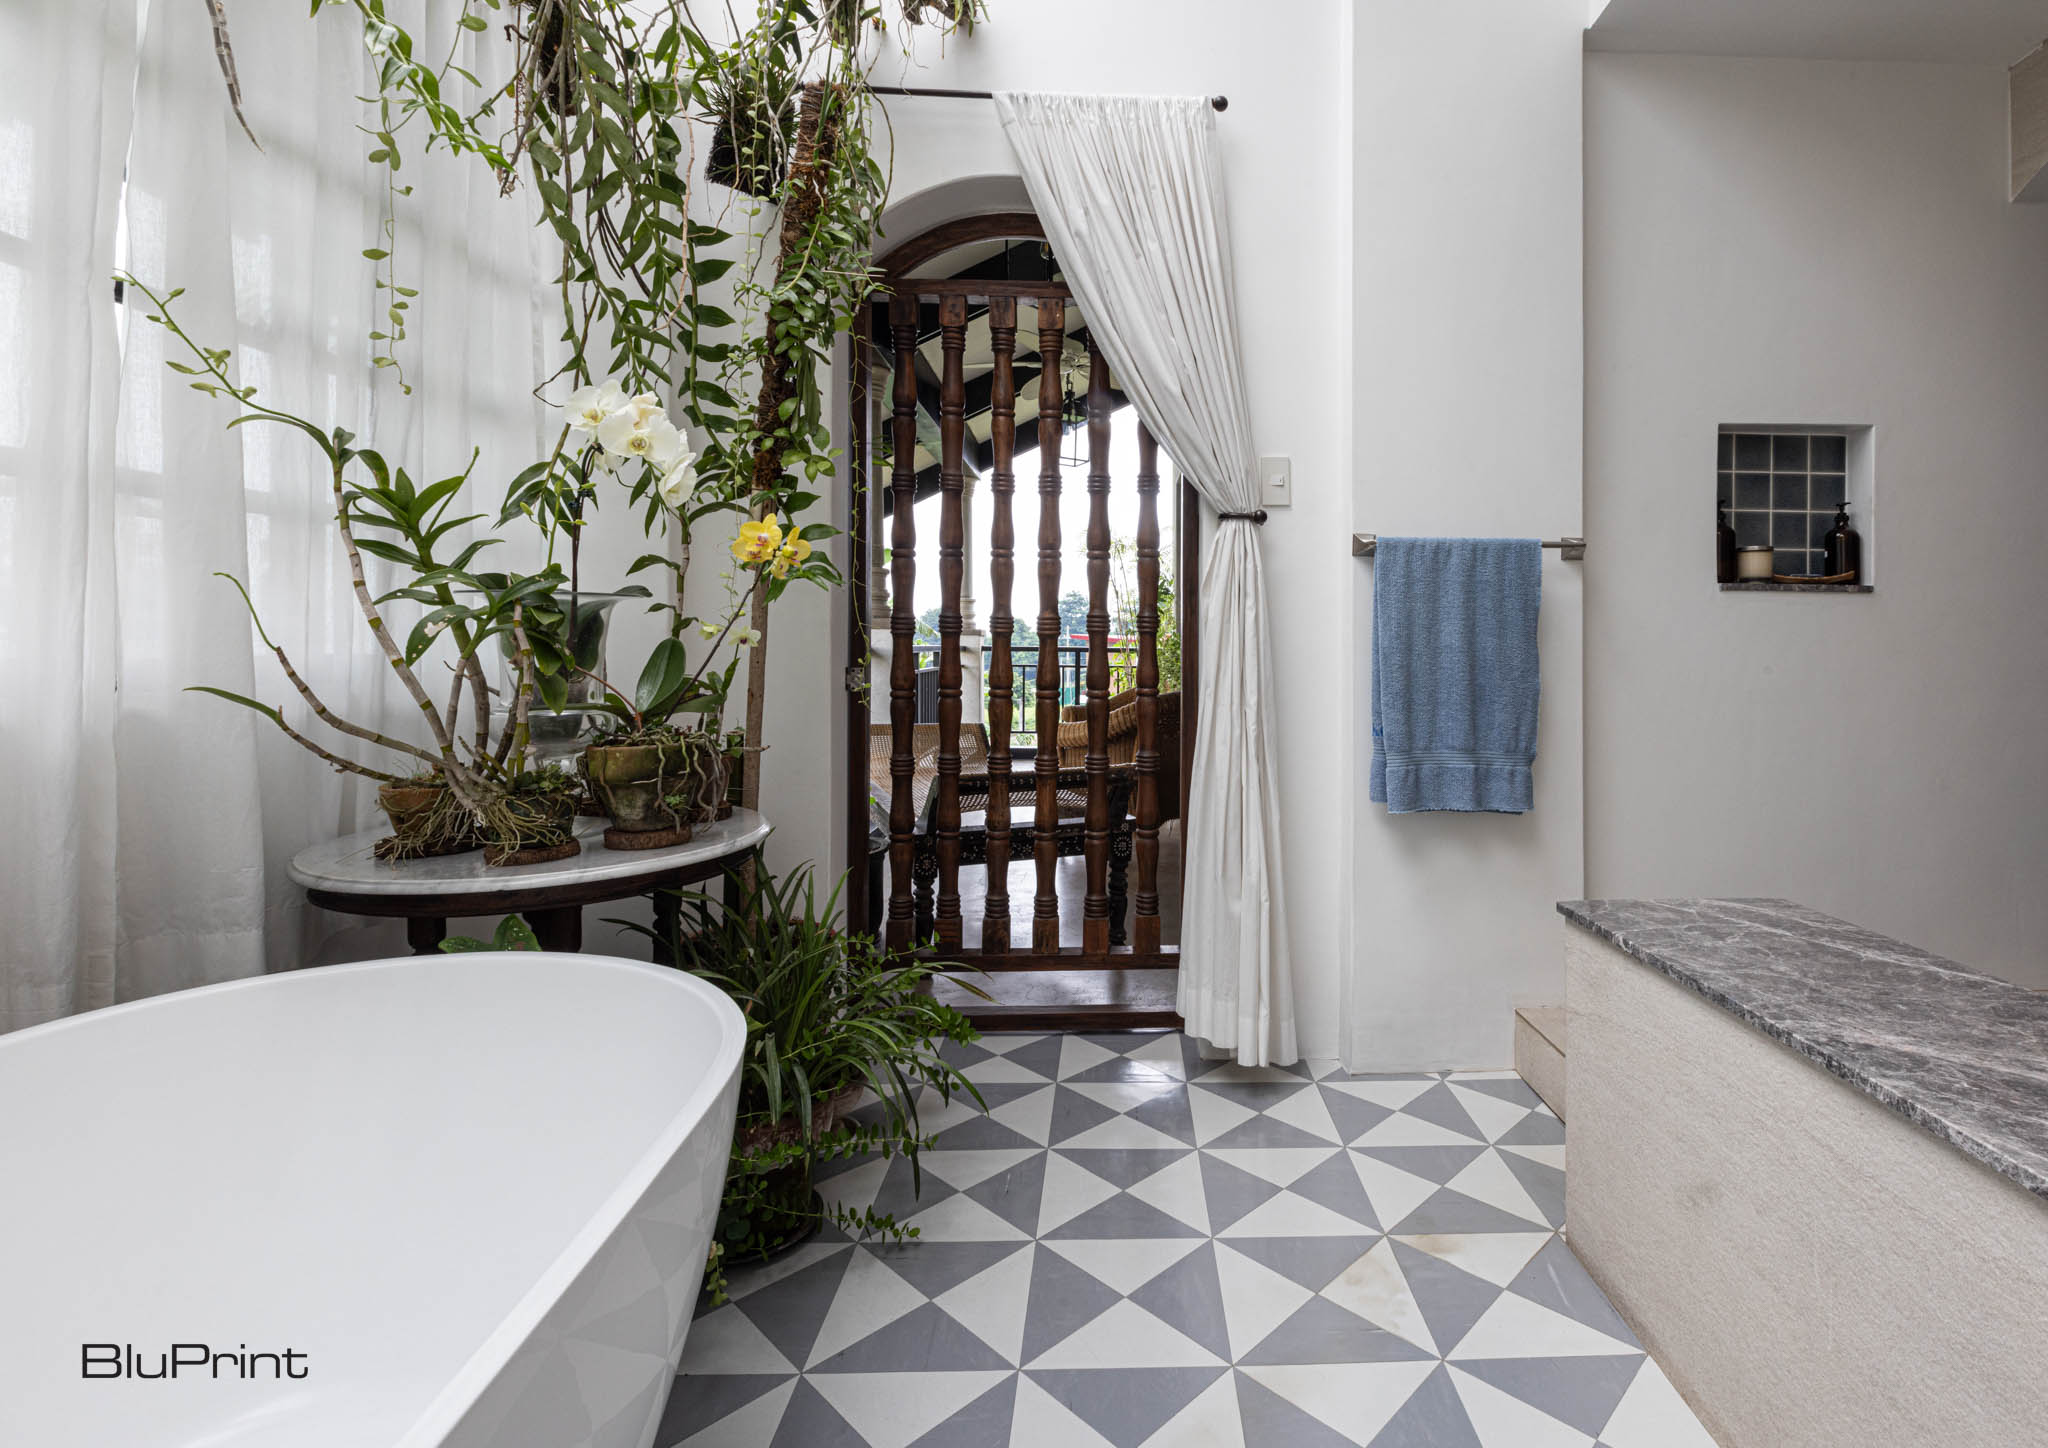 A large bathroom filled with plants, with a large white tub, patterned tile, fabric curtains.